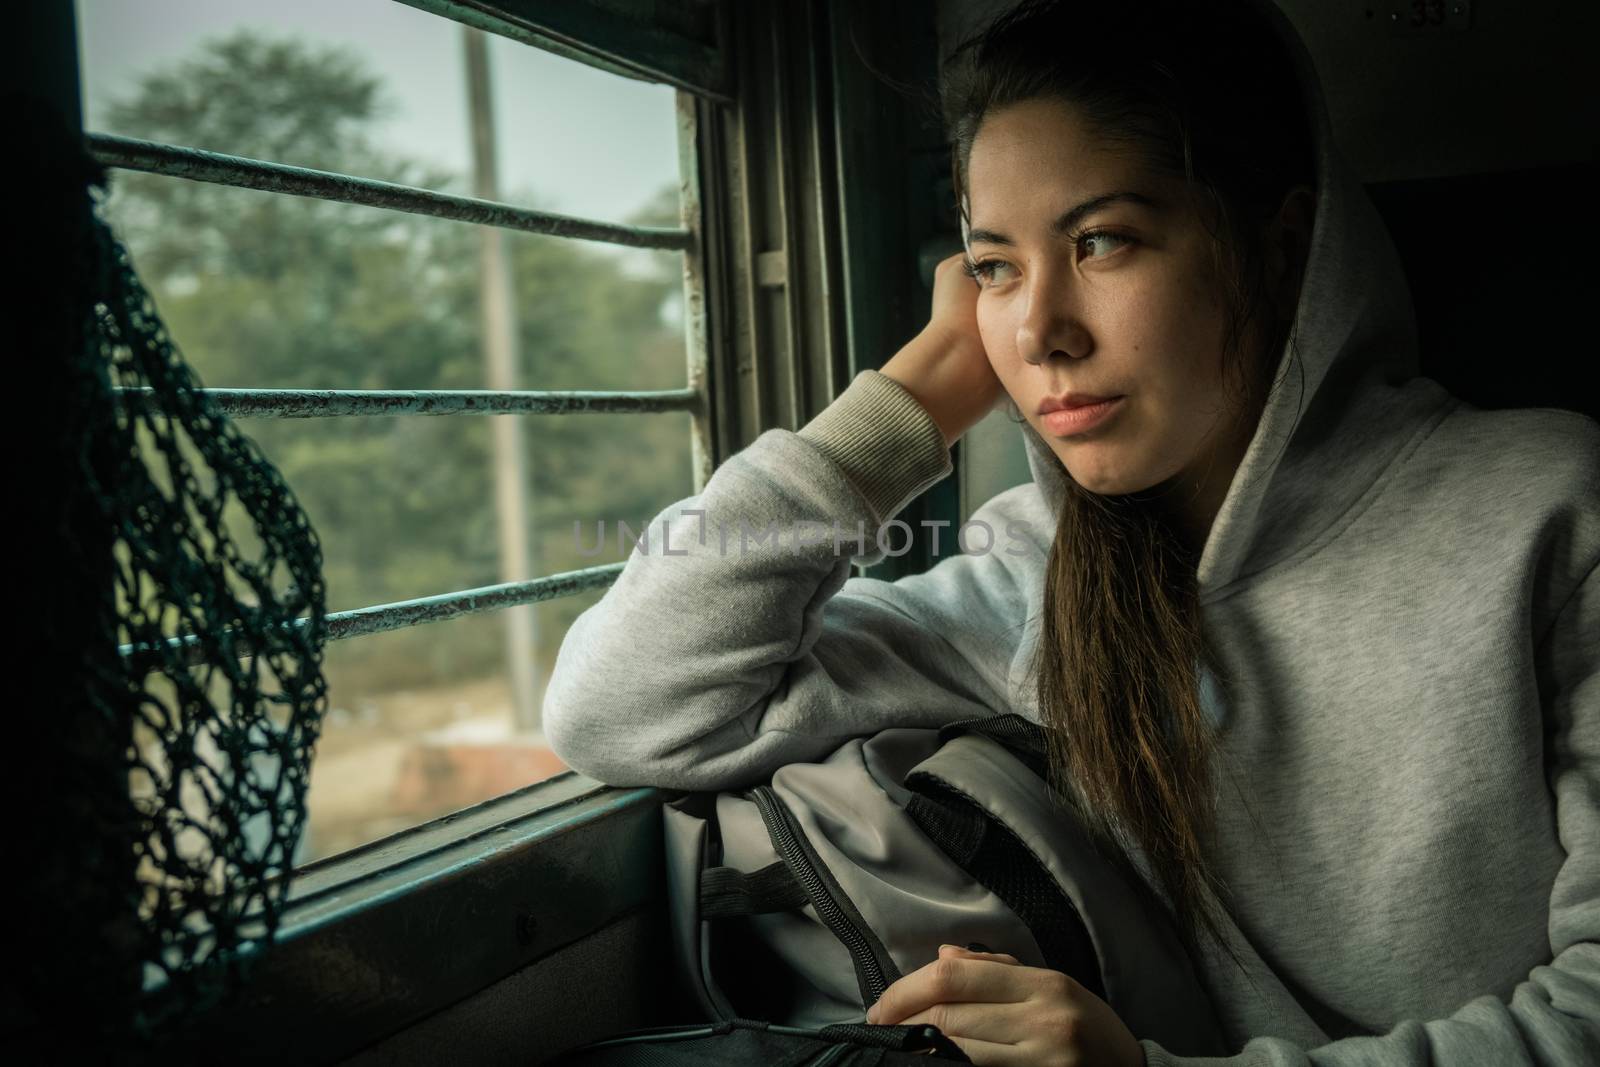 Young female passenger travel by passenger Train by snep_photo